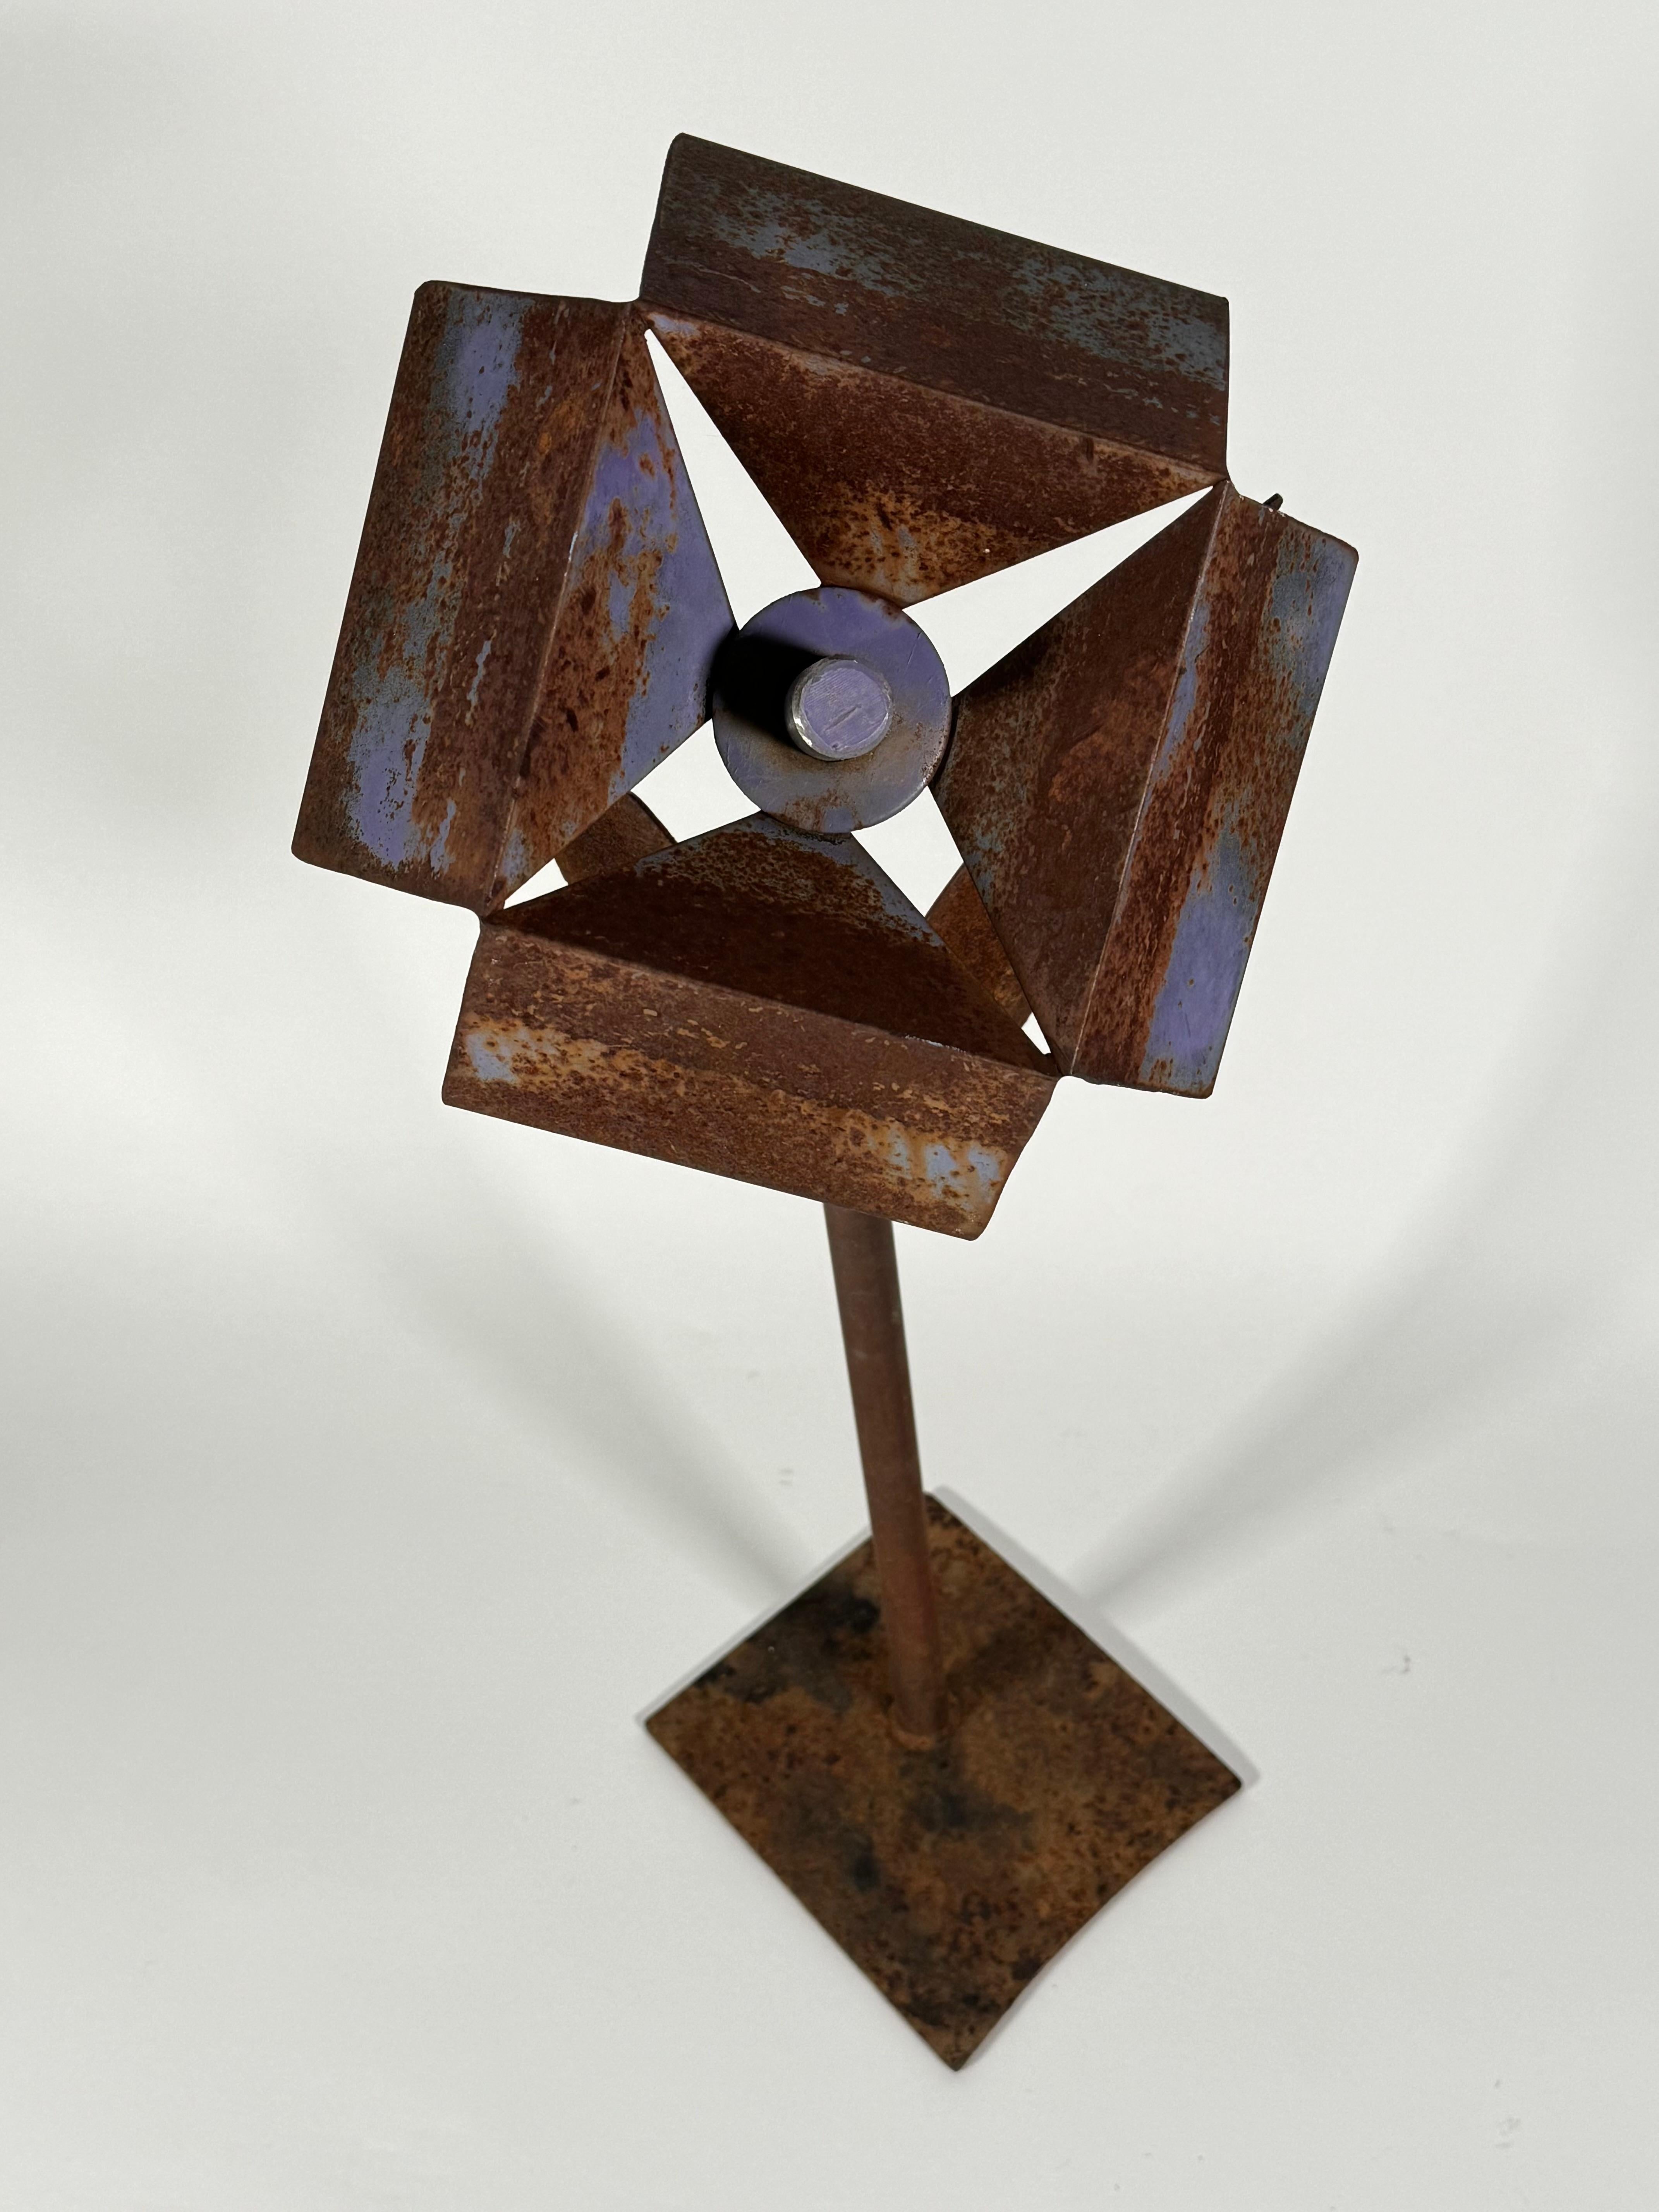 Abstract welded metal sculpture of a flower by an unknown artist, having a nice patina from being left out in the elements from over the years. There is an hint of paint on the petals. A striking blend of both rustic and modernist aesthetics.